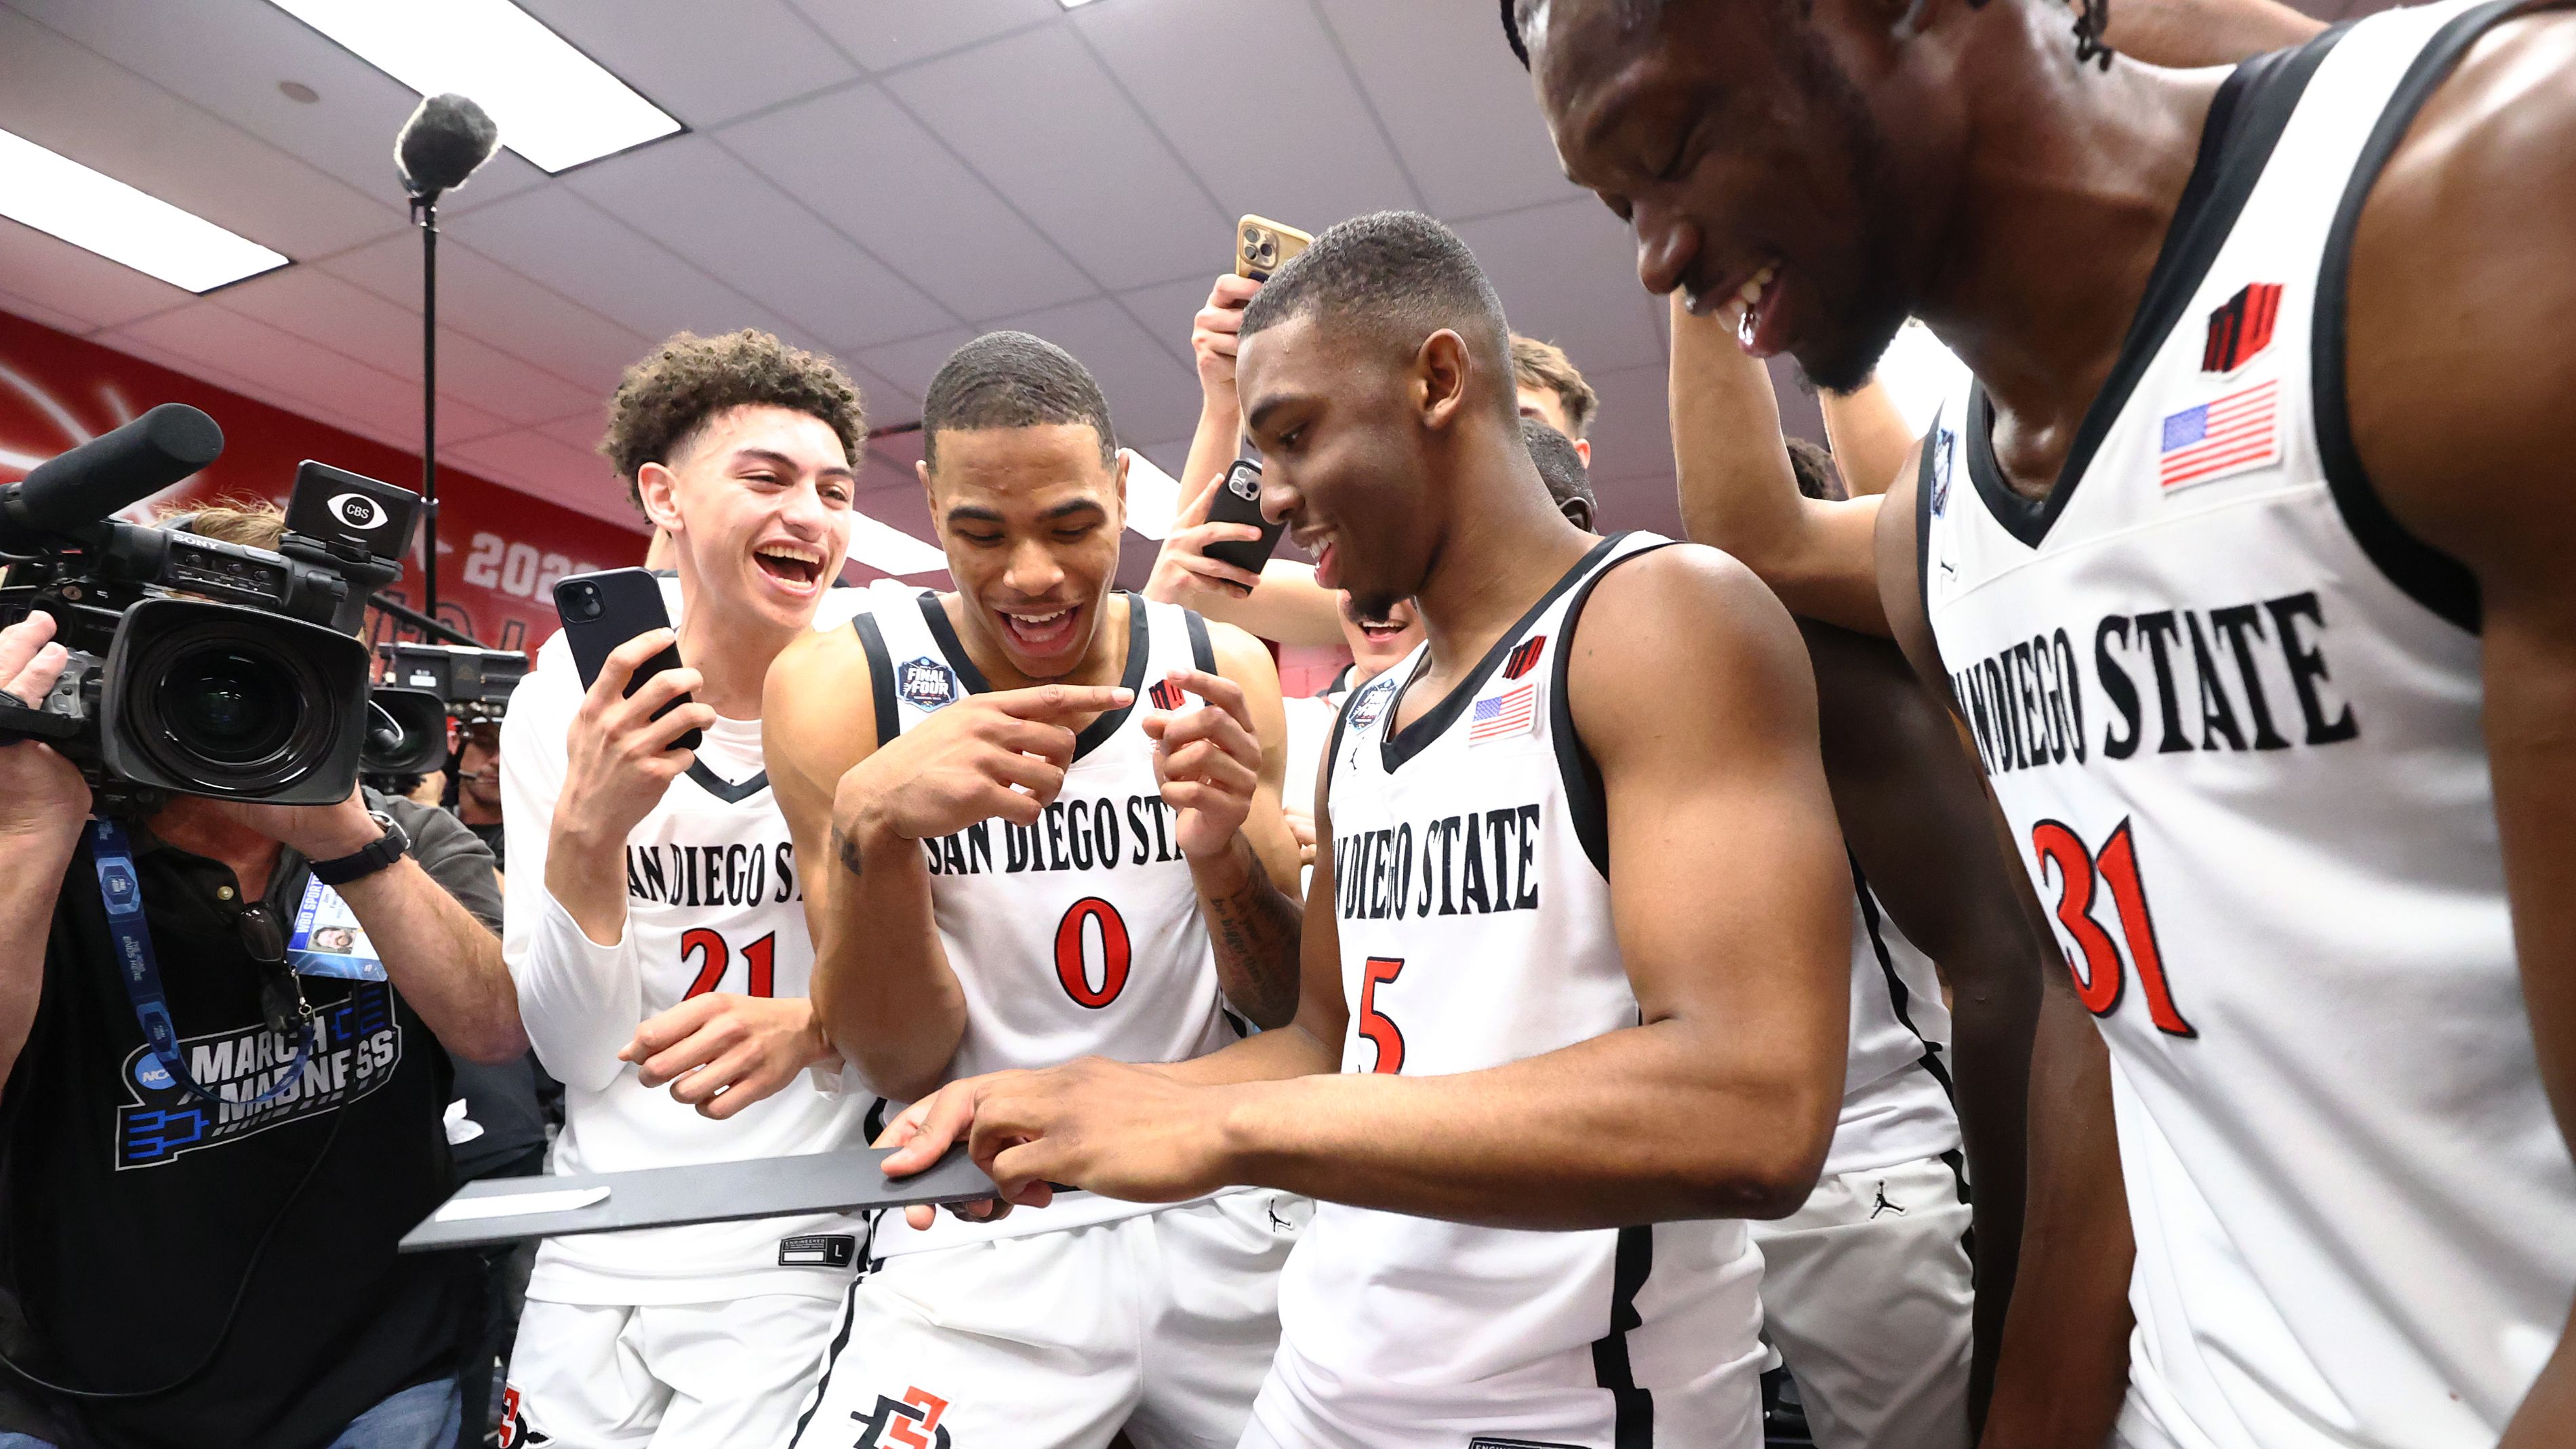 2023 March Madness: UConn defeats San Diego State in the national